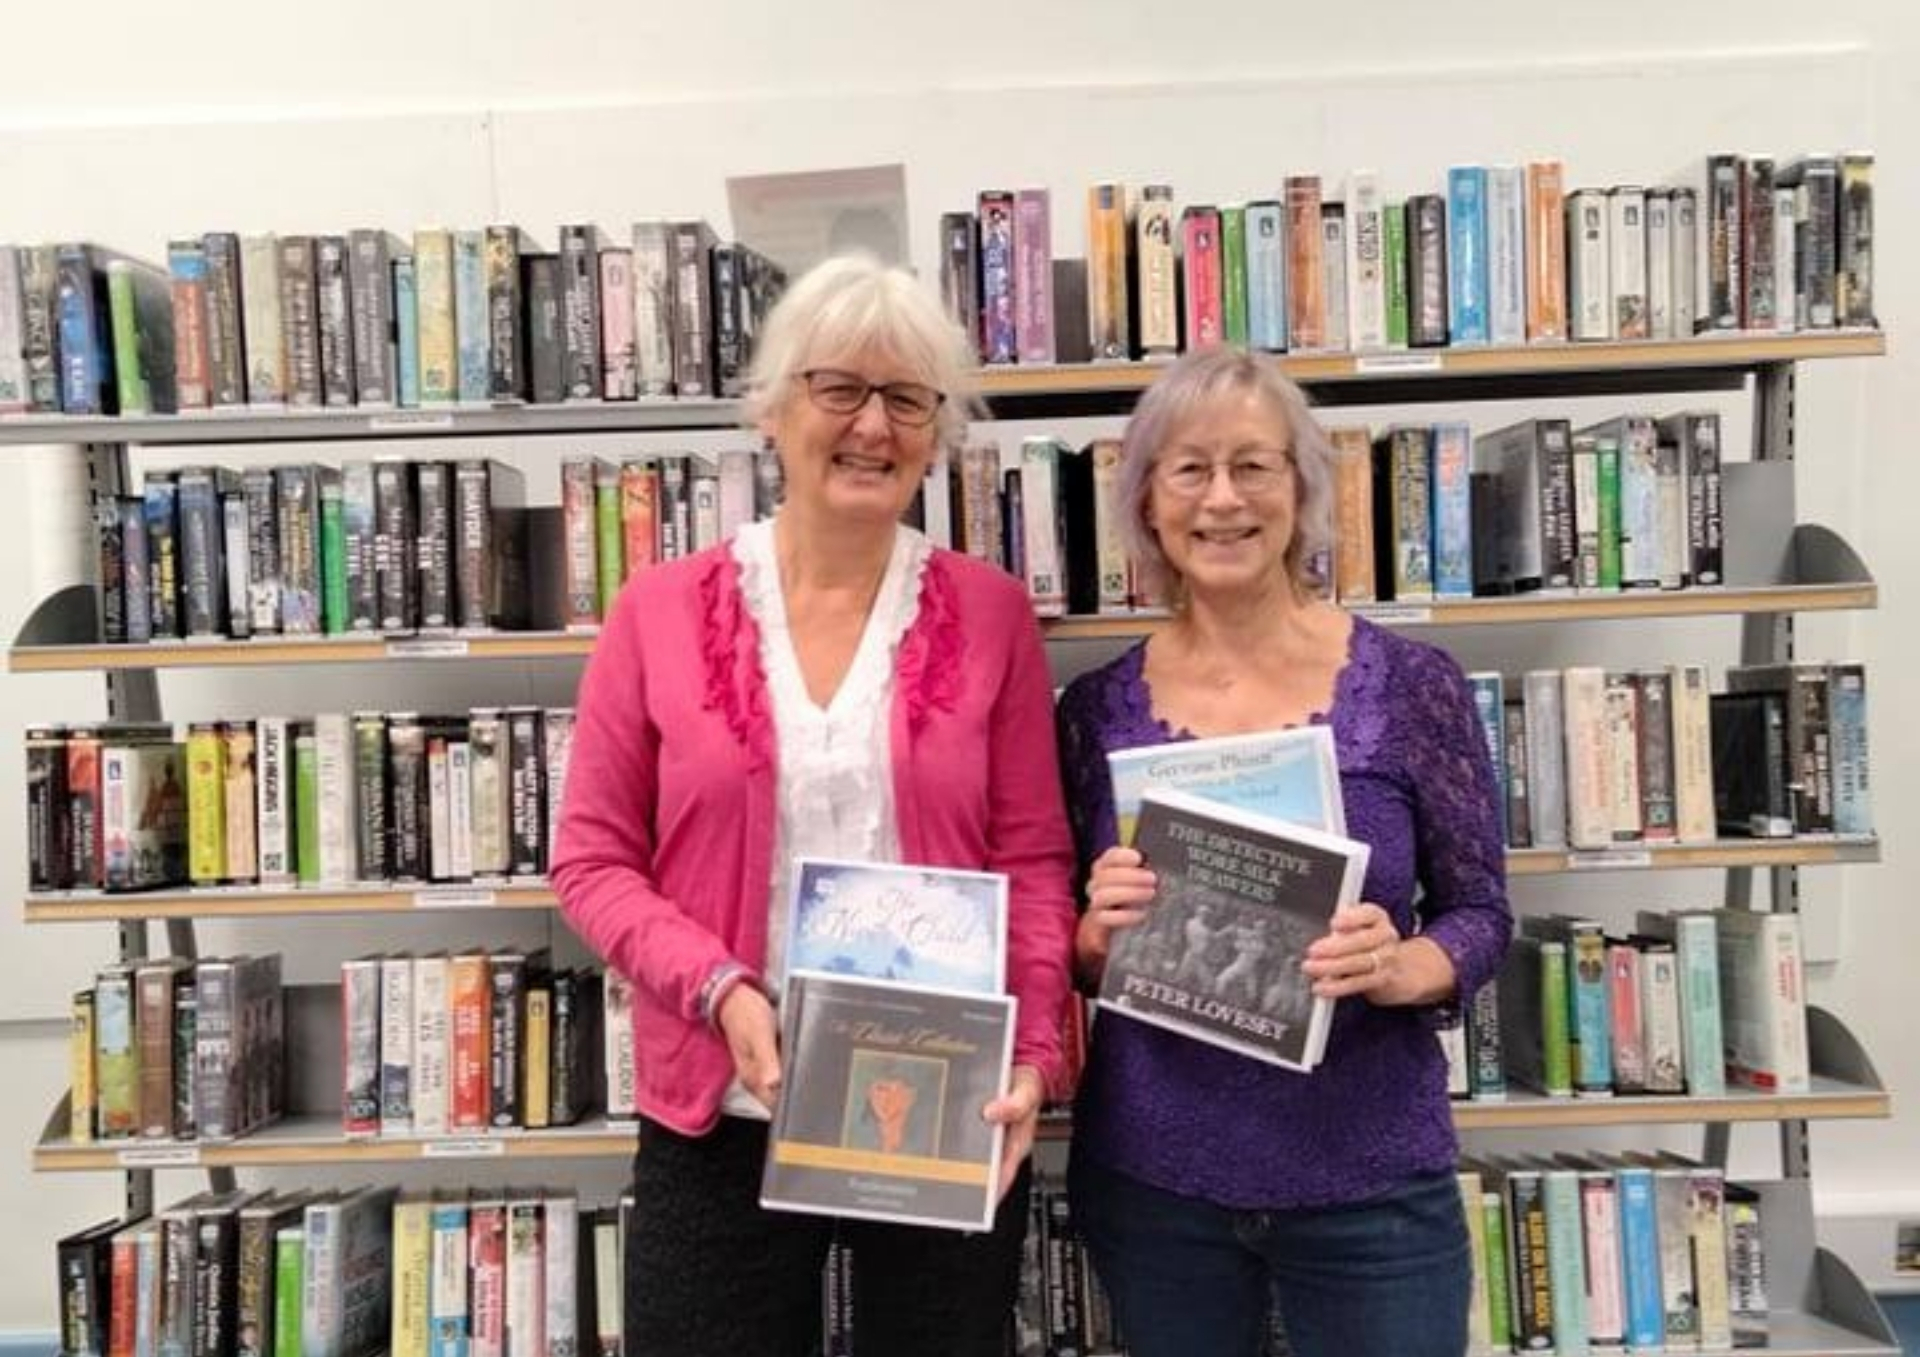 A photo showing Hilary Cox (Libraries and Information Service) and Caroline Talbott (Jean's daughter) in front of a library shelf of audio books